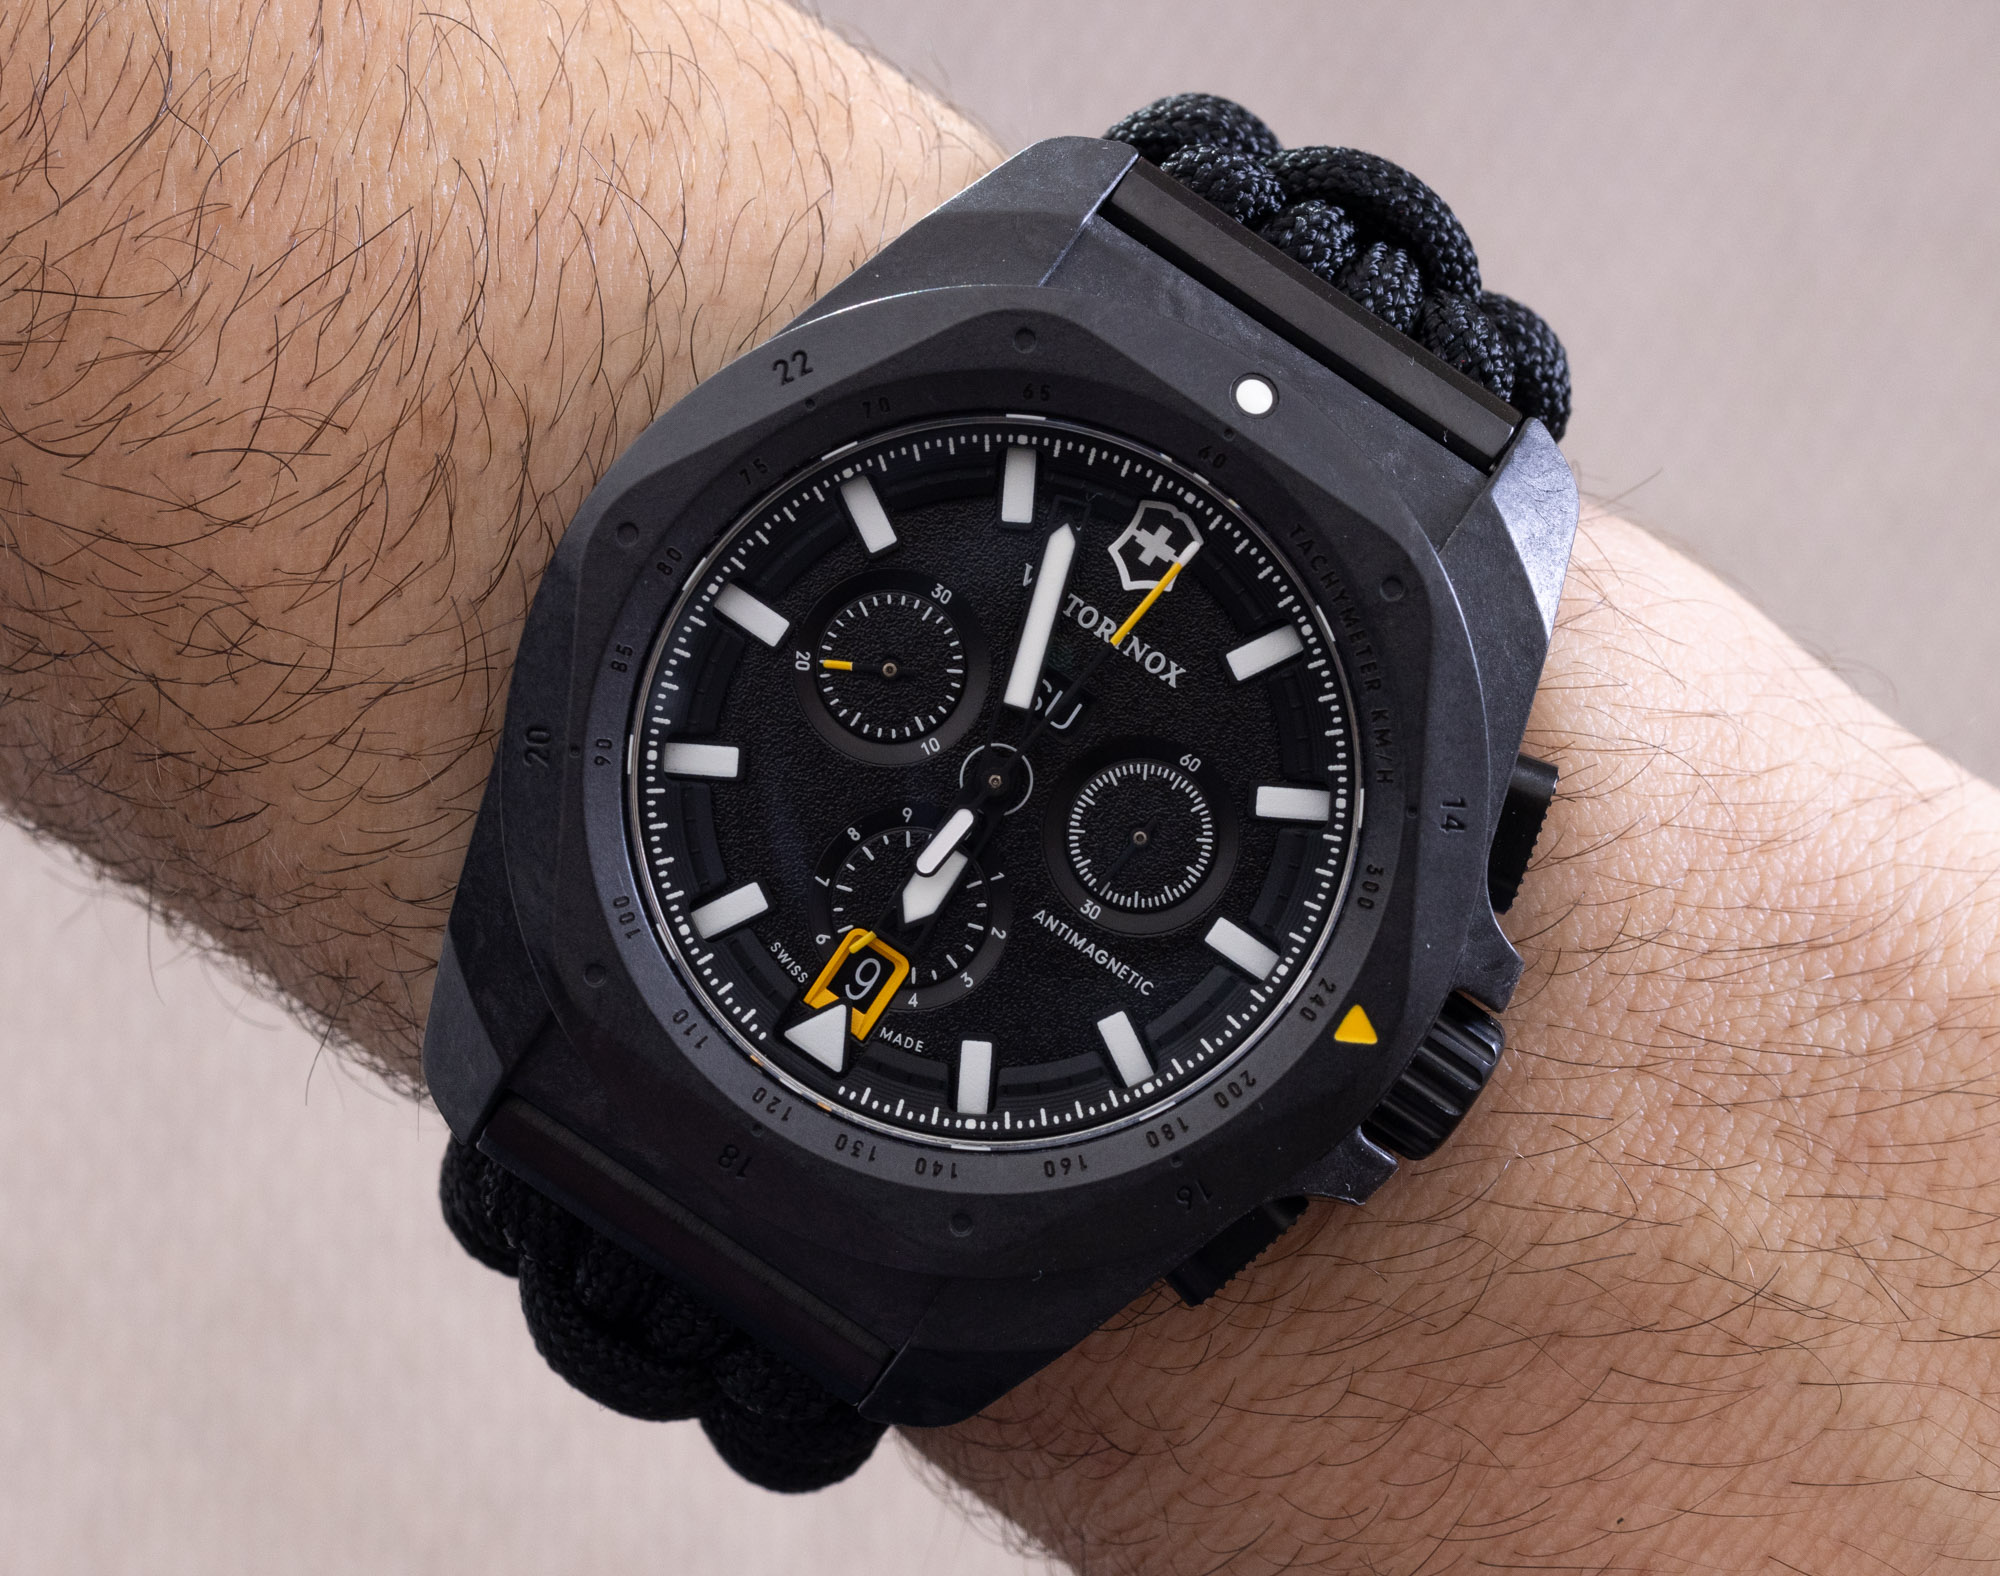 Hands-On: Victorinox I.N.O.X. Chronograph In Black Carbon